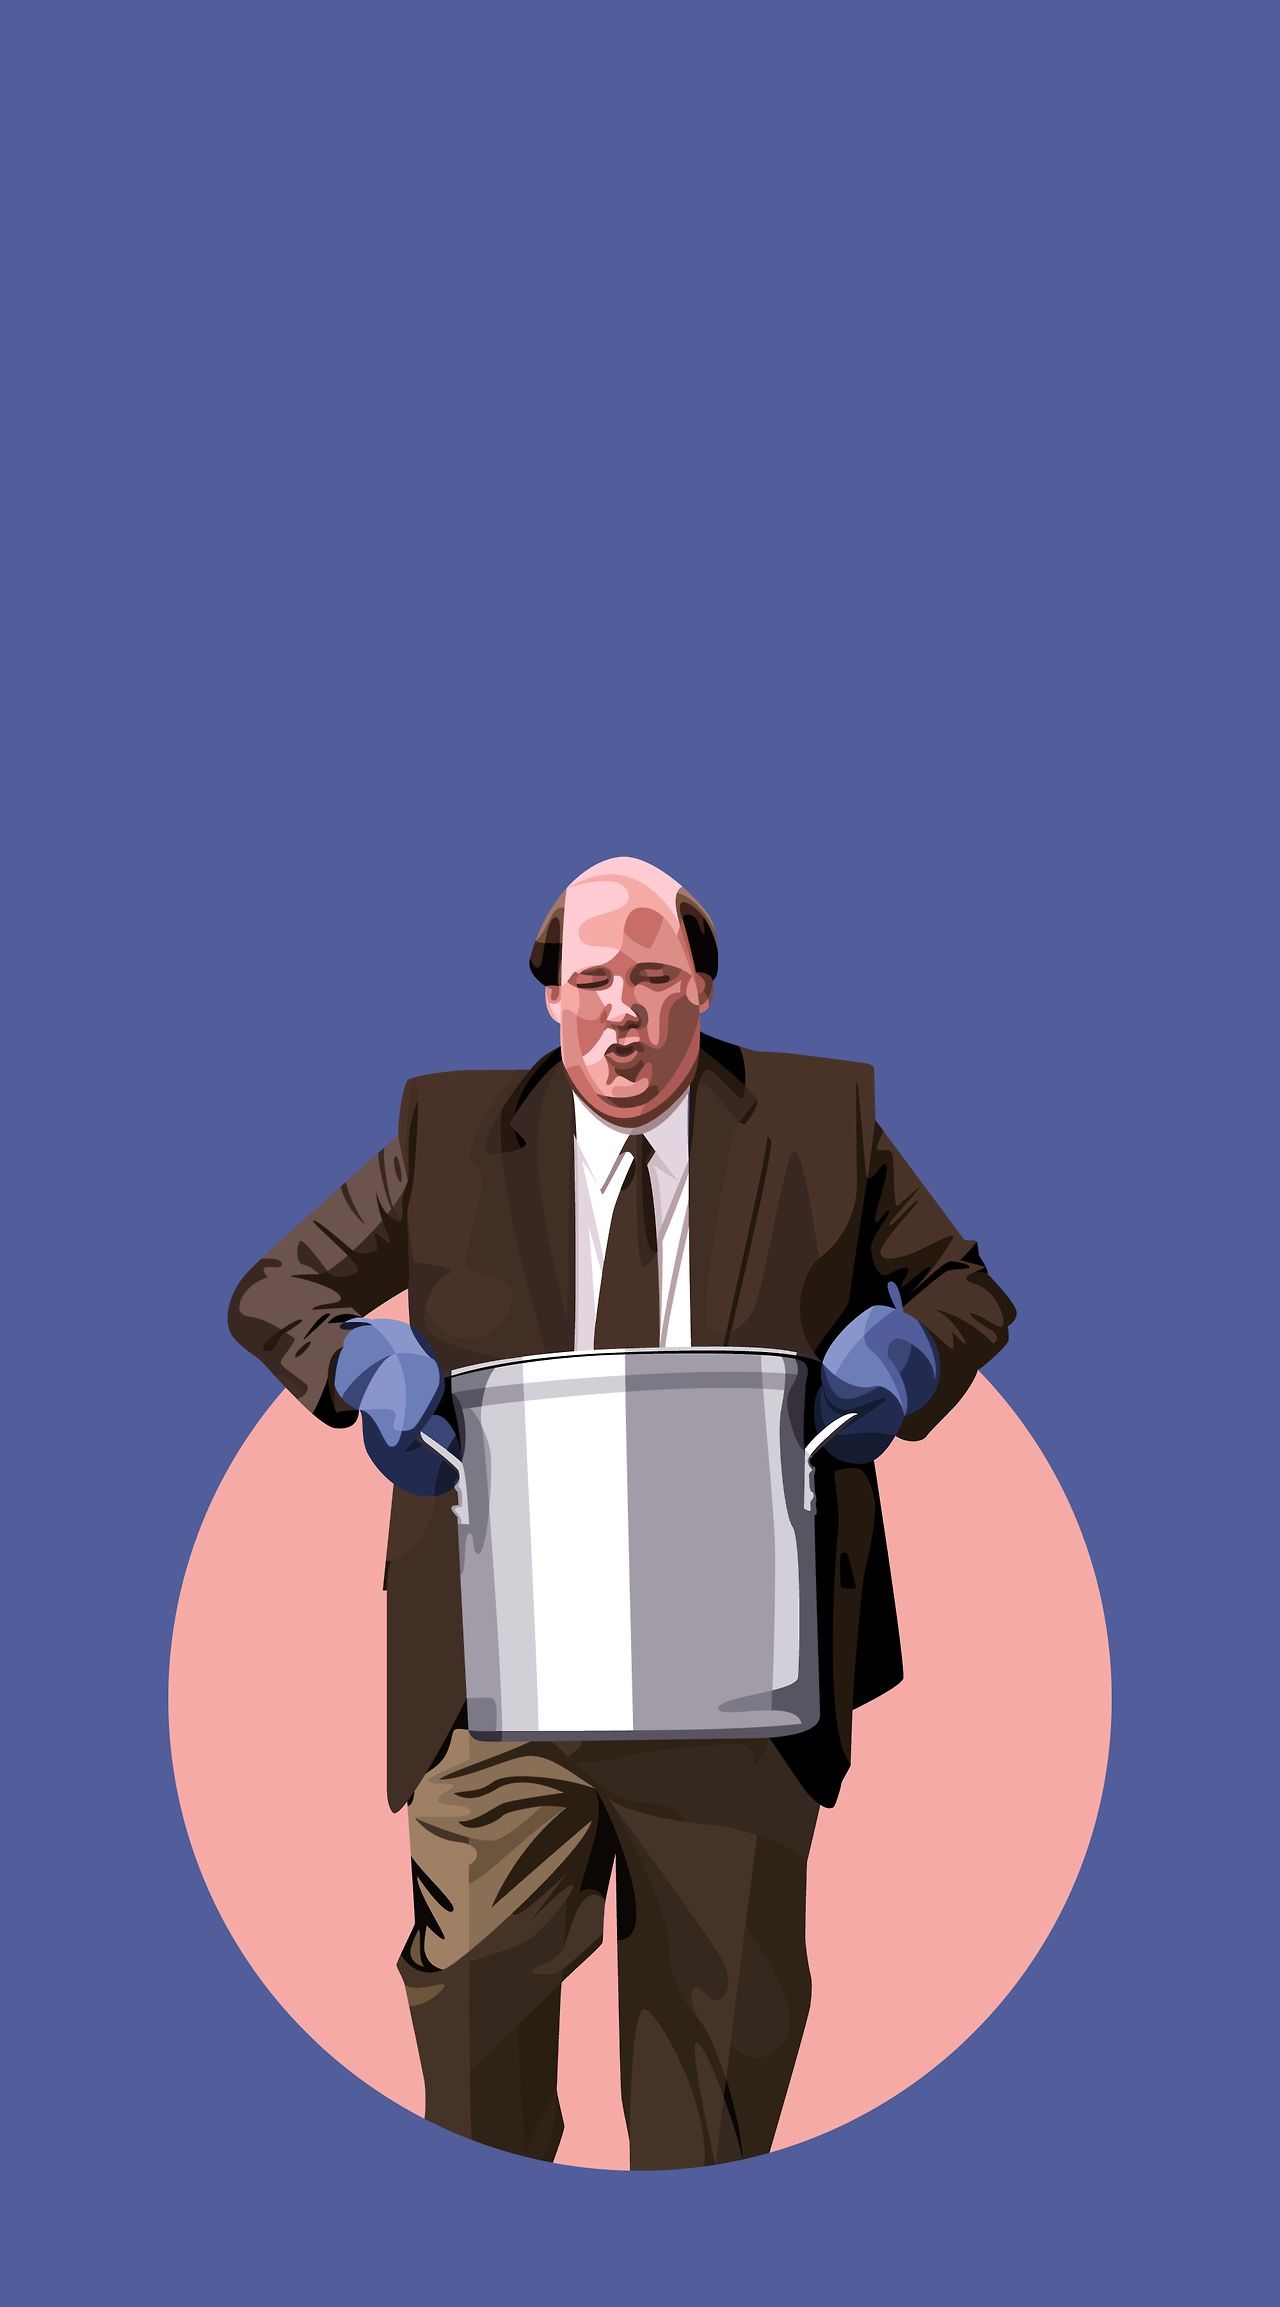 A digital painting of Creed Bratton from The Office holding a large stock pot. - The Office